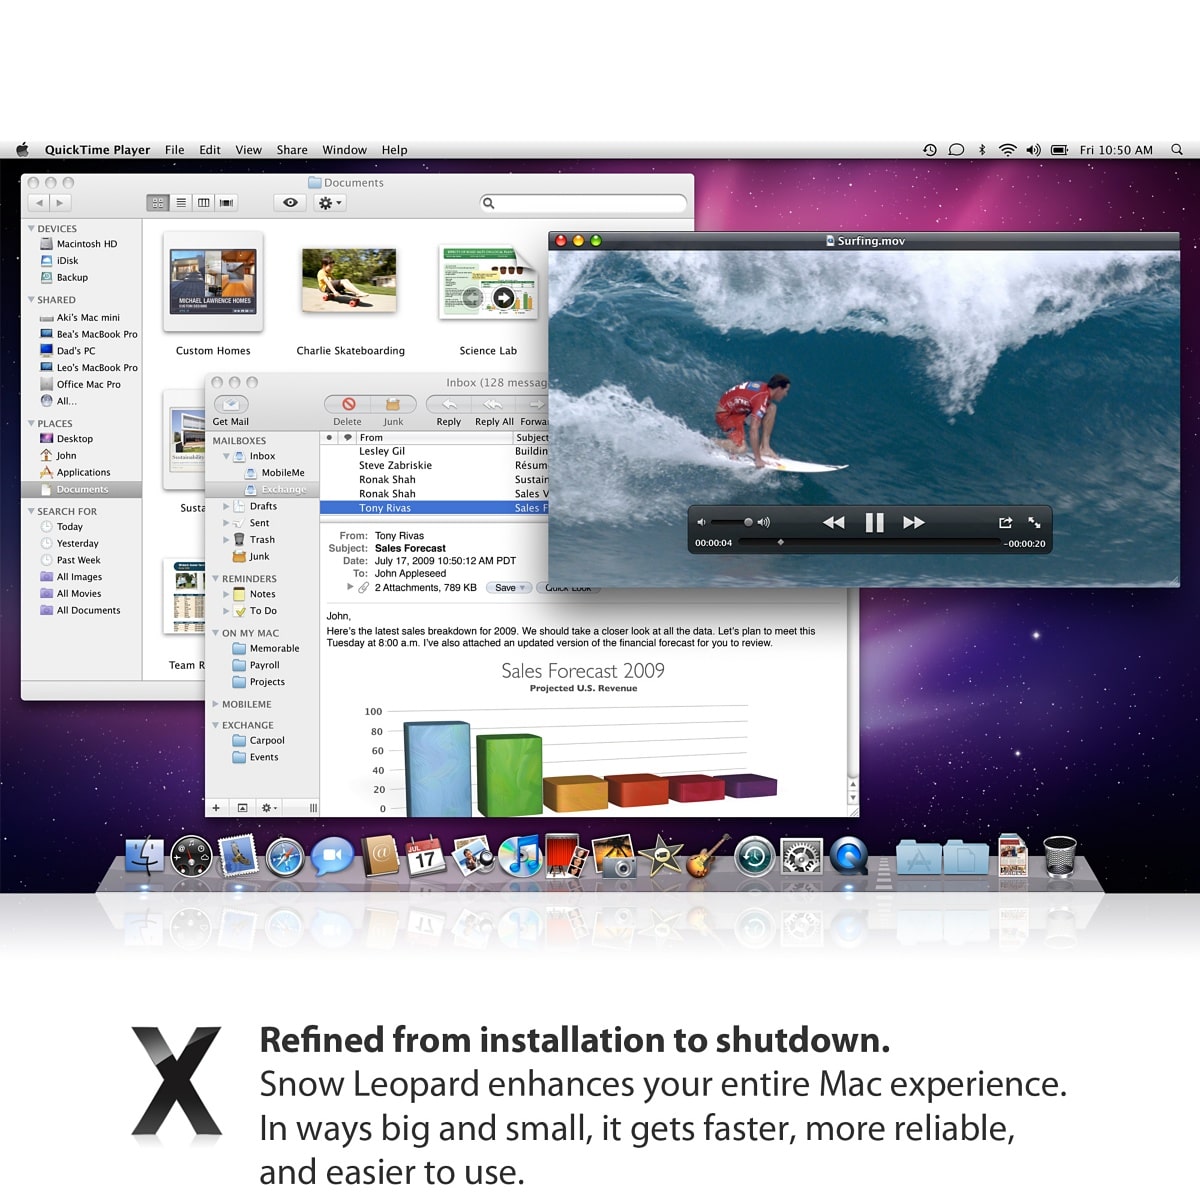 Swf Player For Mac Os X 10.6